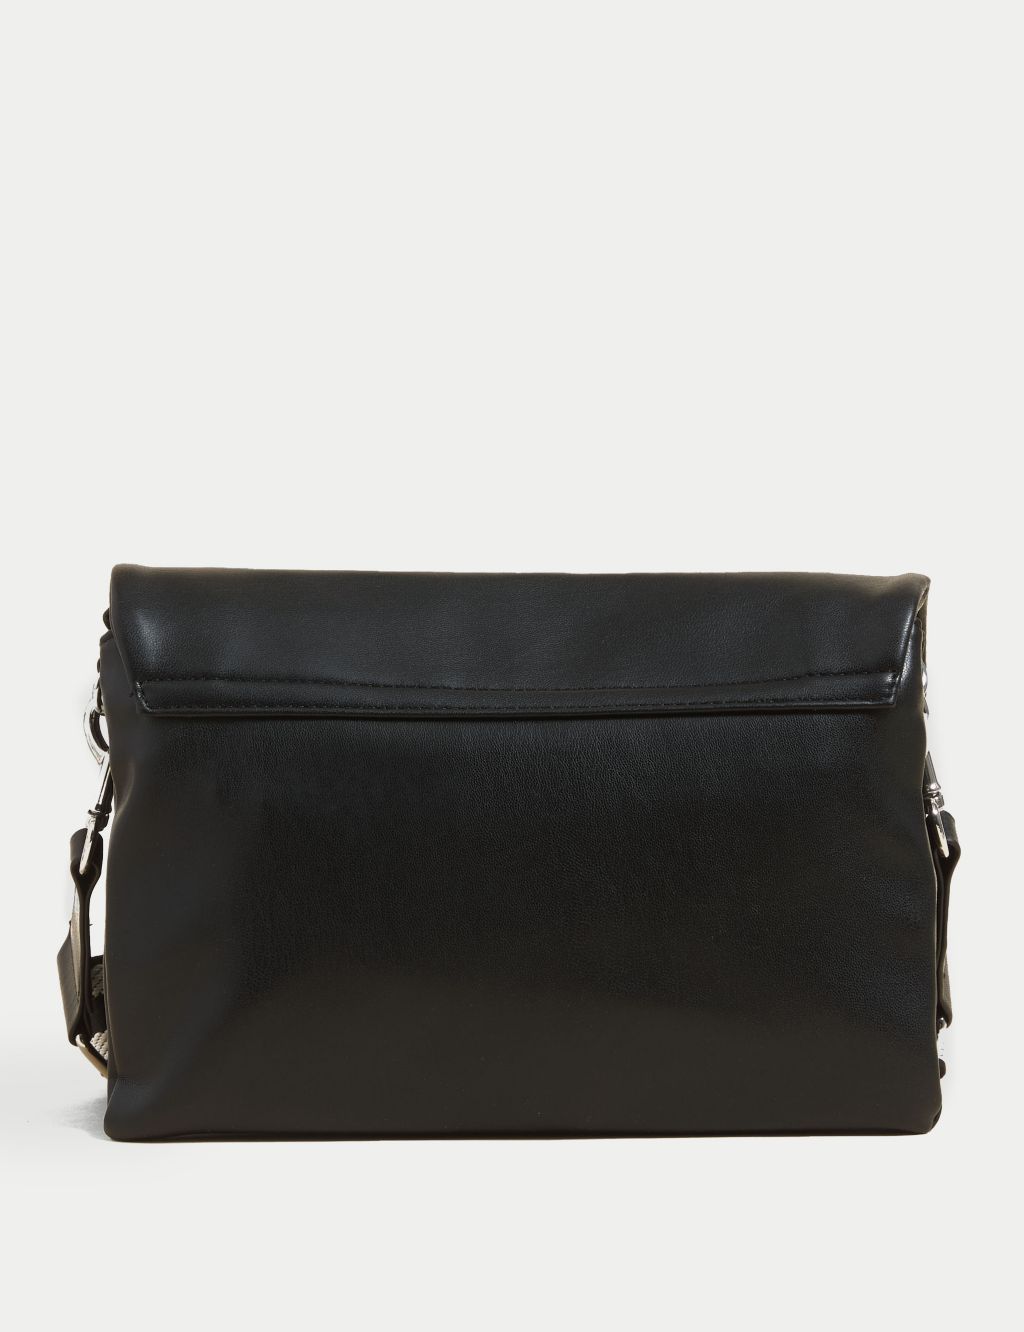 Faux Leather Messenger Cross Body Bag image 5